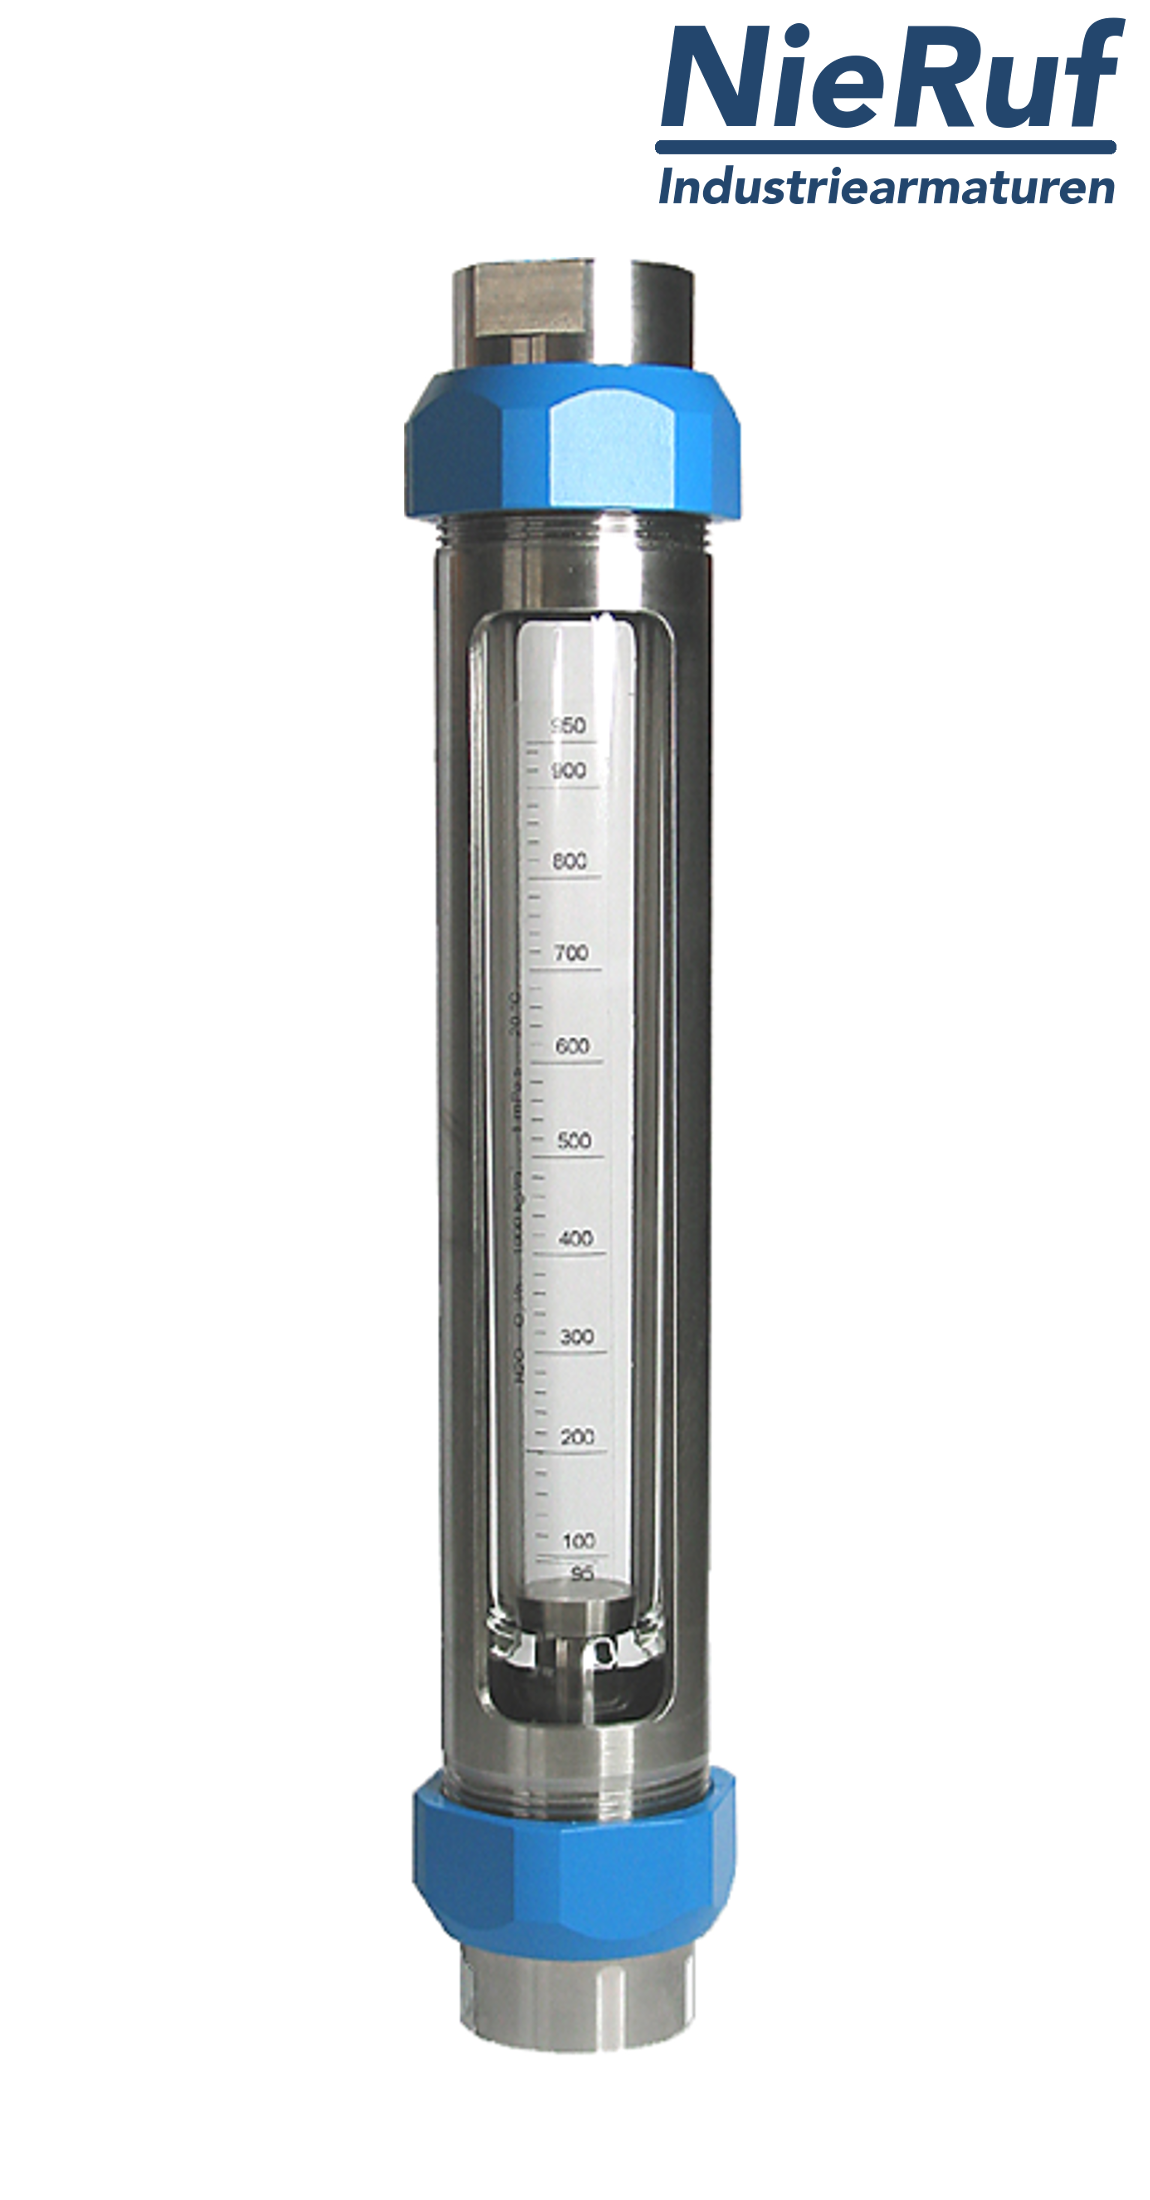 Variable area flowmeter stainless steel + borosilicate 1" Inch 80.0 - 800 l/h water EPDM